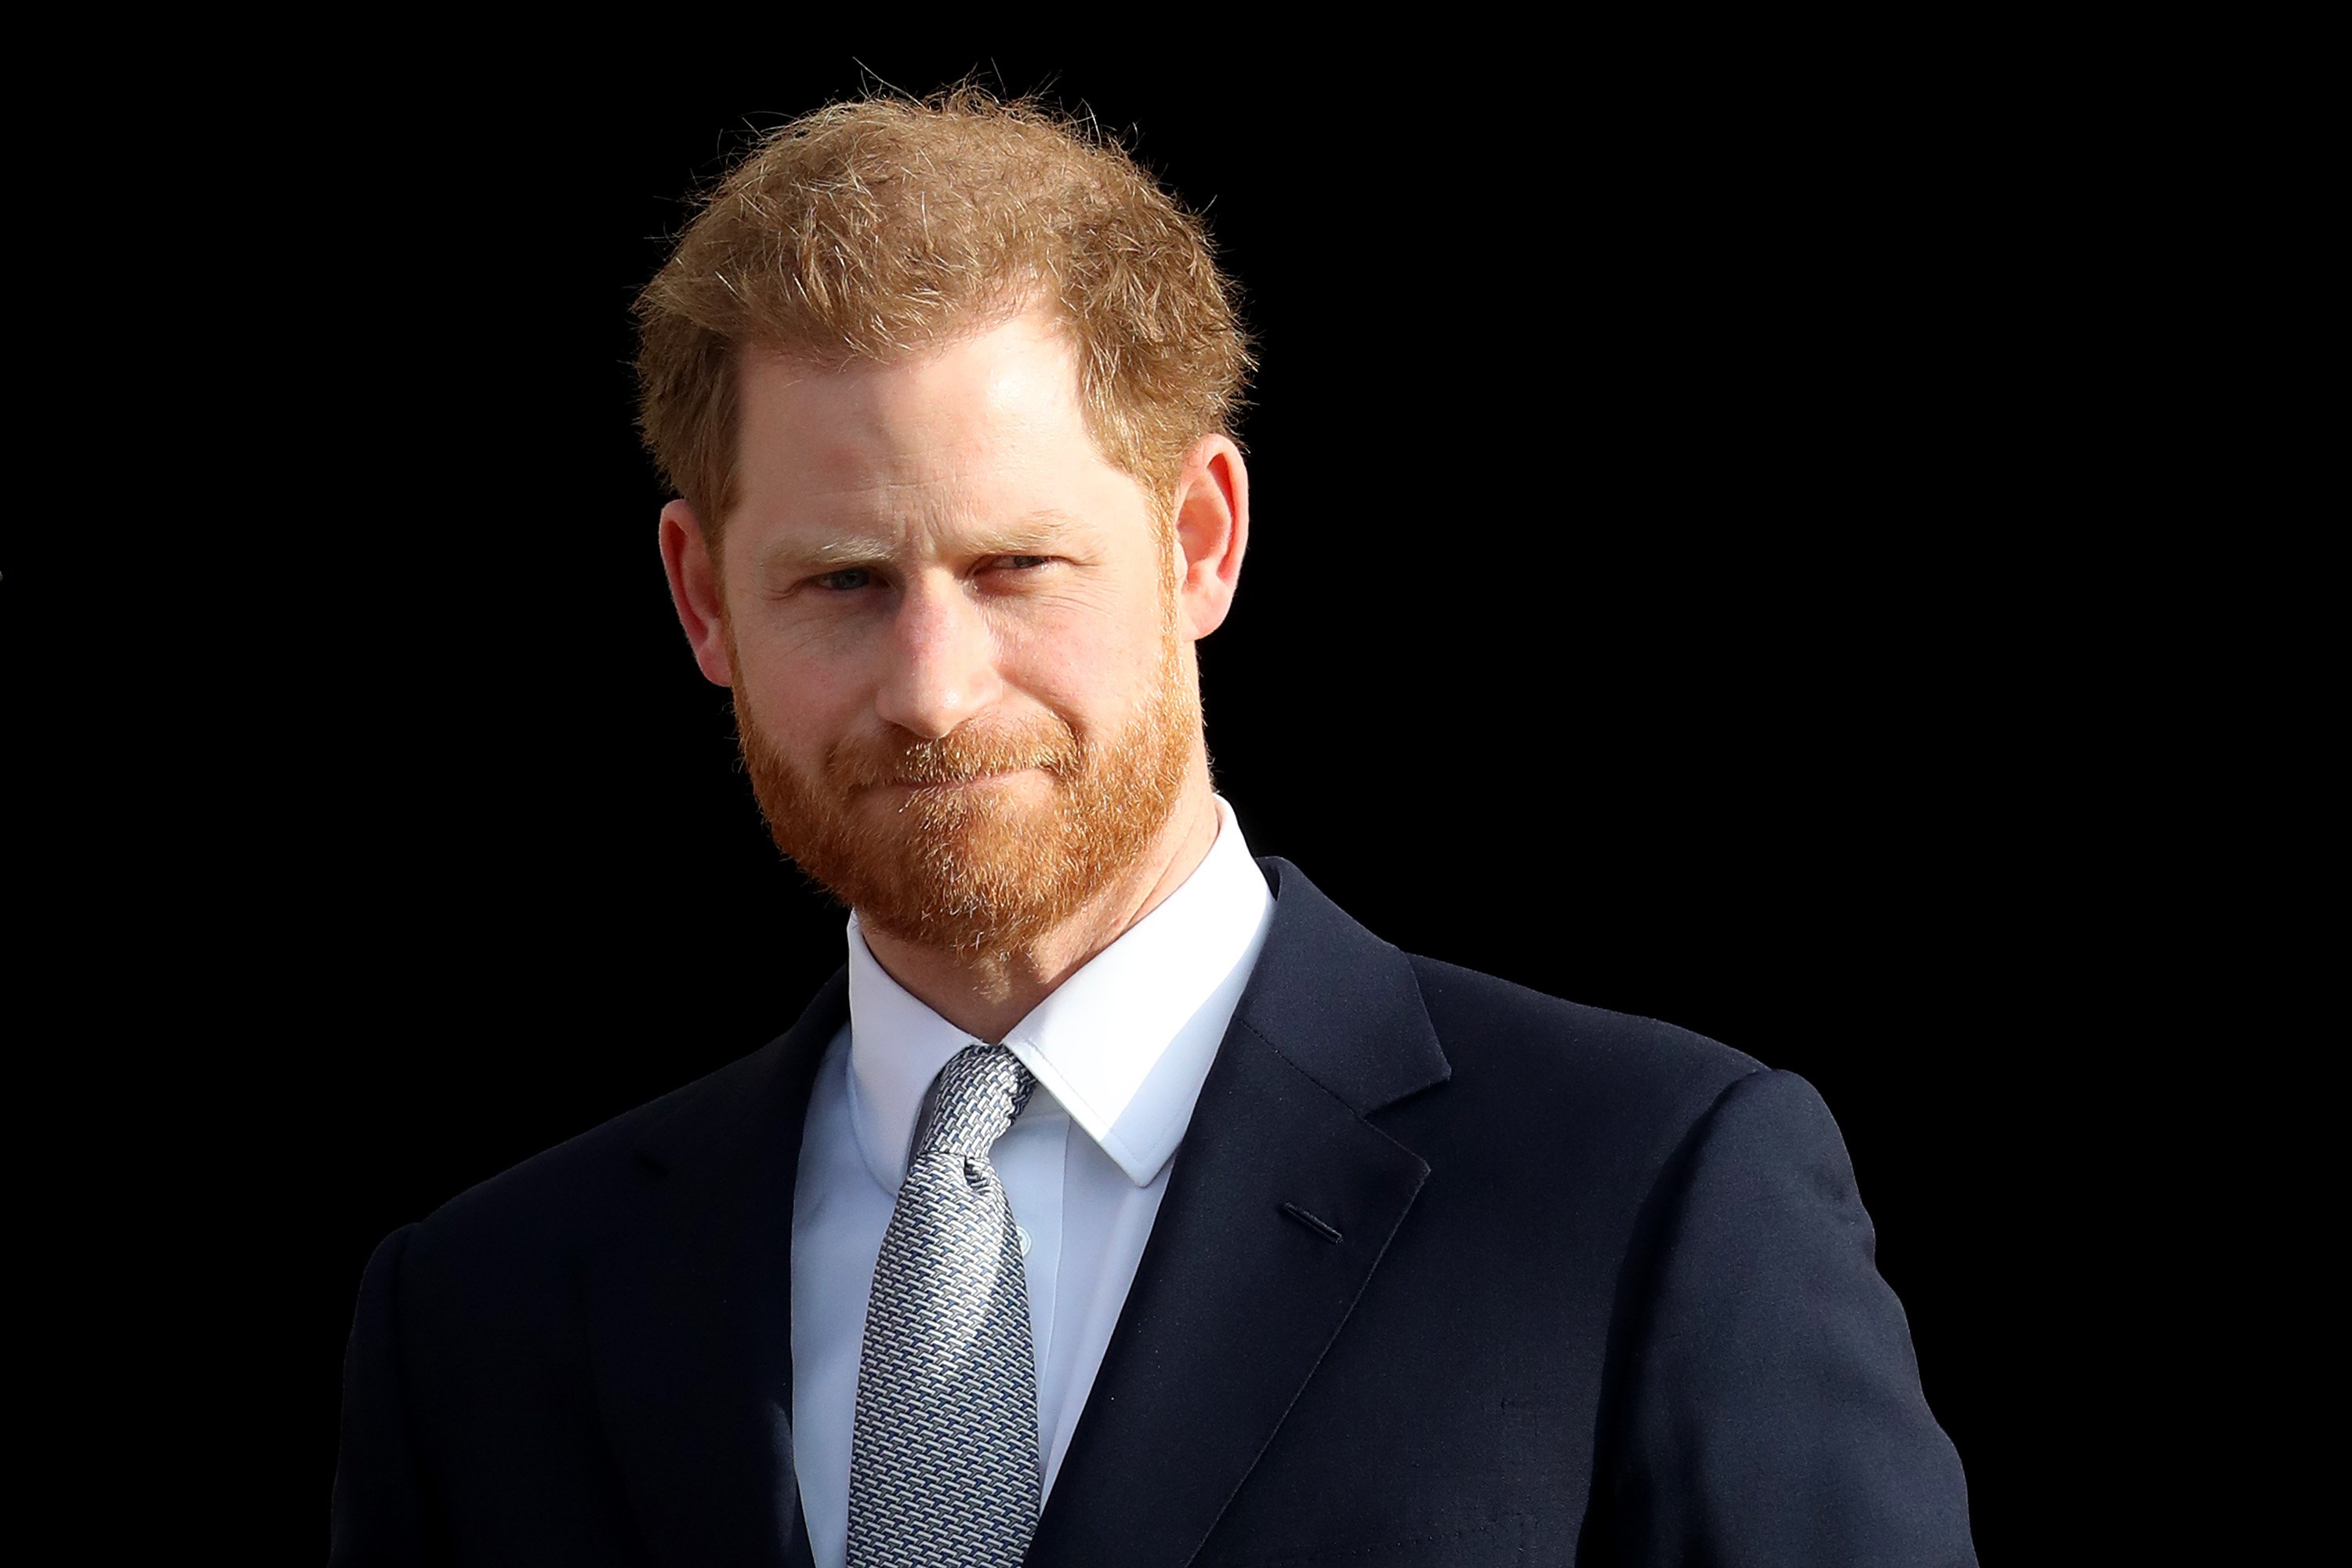 Prince Harry Should Remove His Comments About Killing 25 People While in Afghanistan, Former US Defense Secretary Says